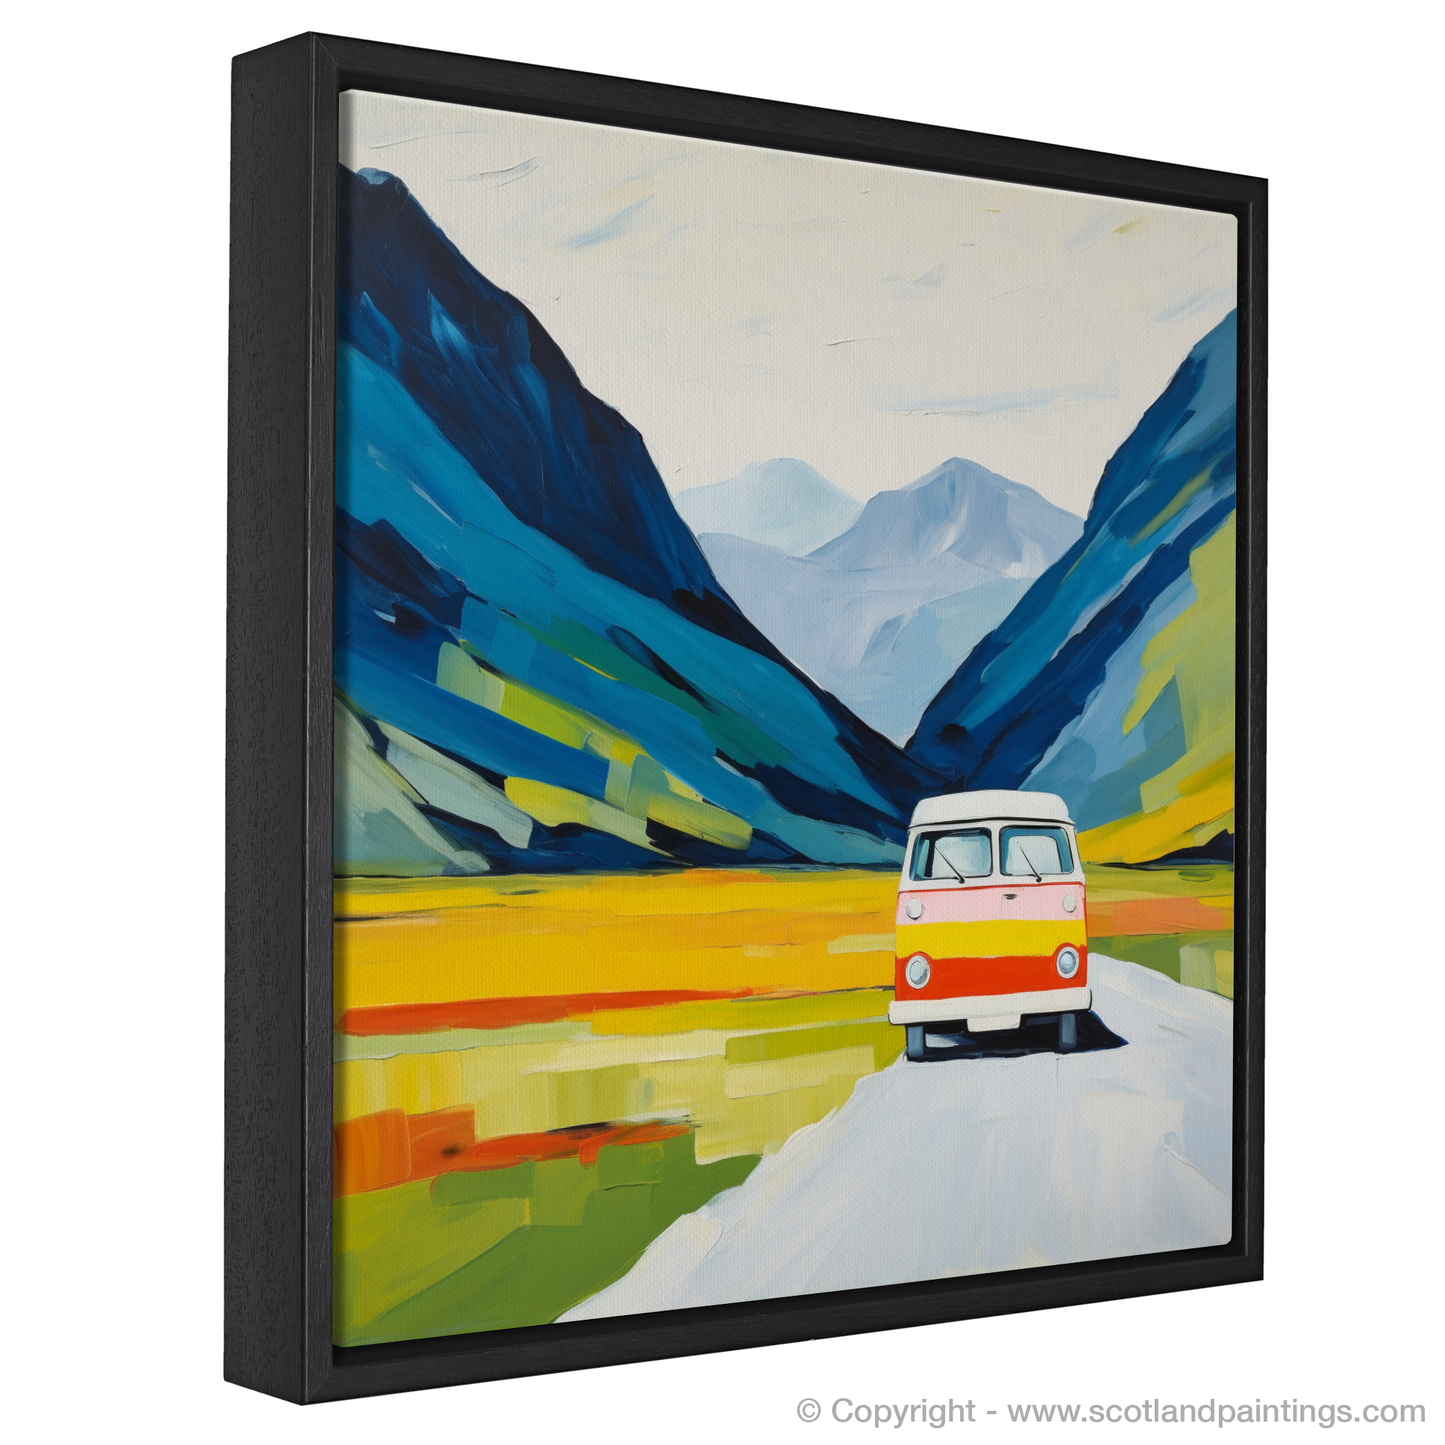 Painting and Art Print of Campervan in Glencoe during summer entitled "Summer Adventure in Glencoe: An Abstract Campervan Escape".